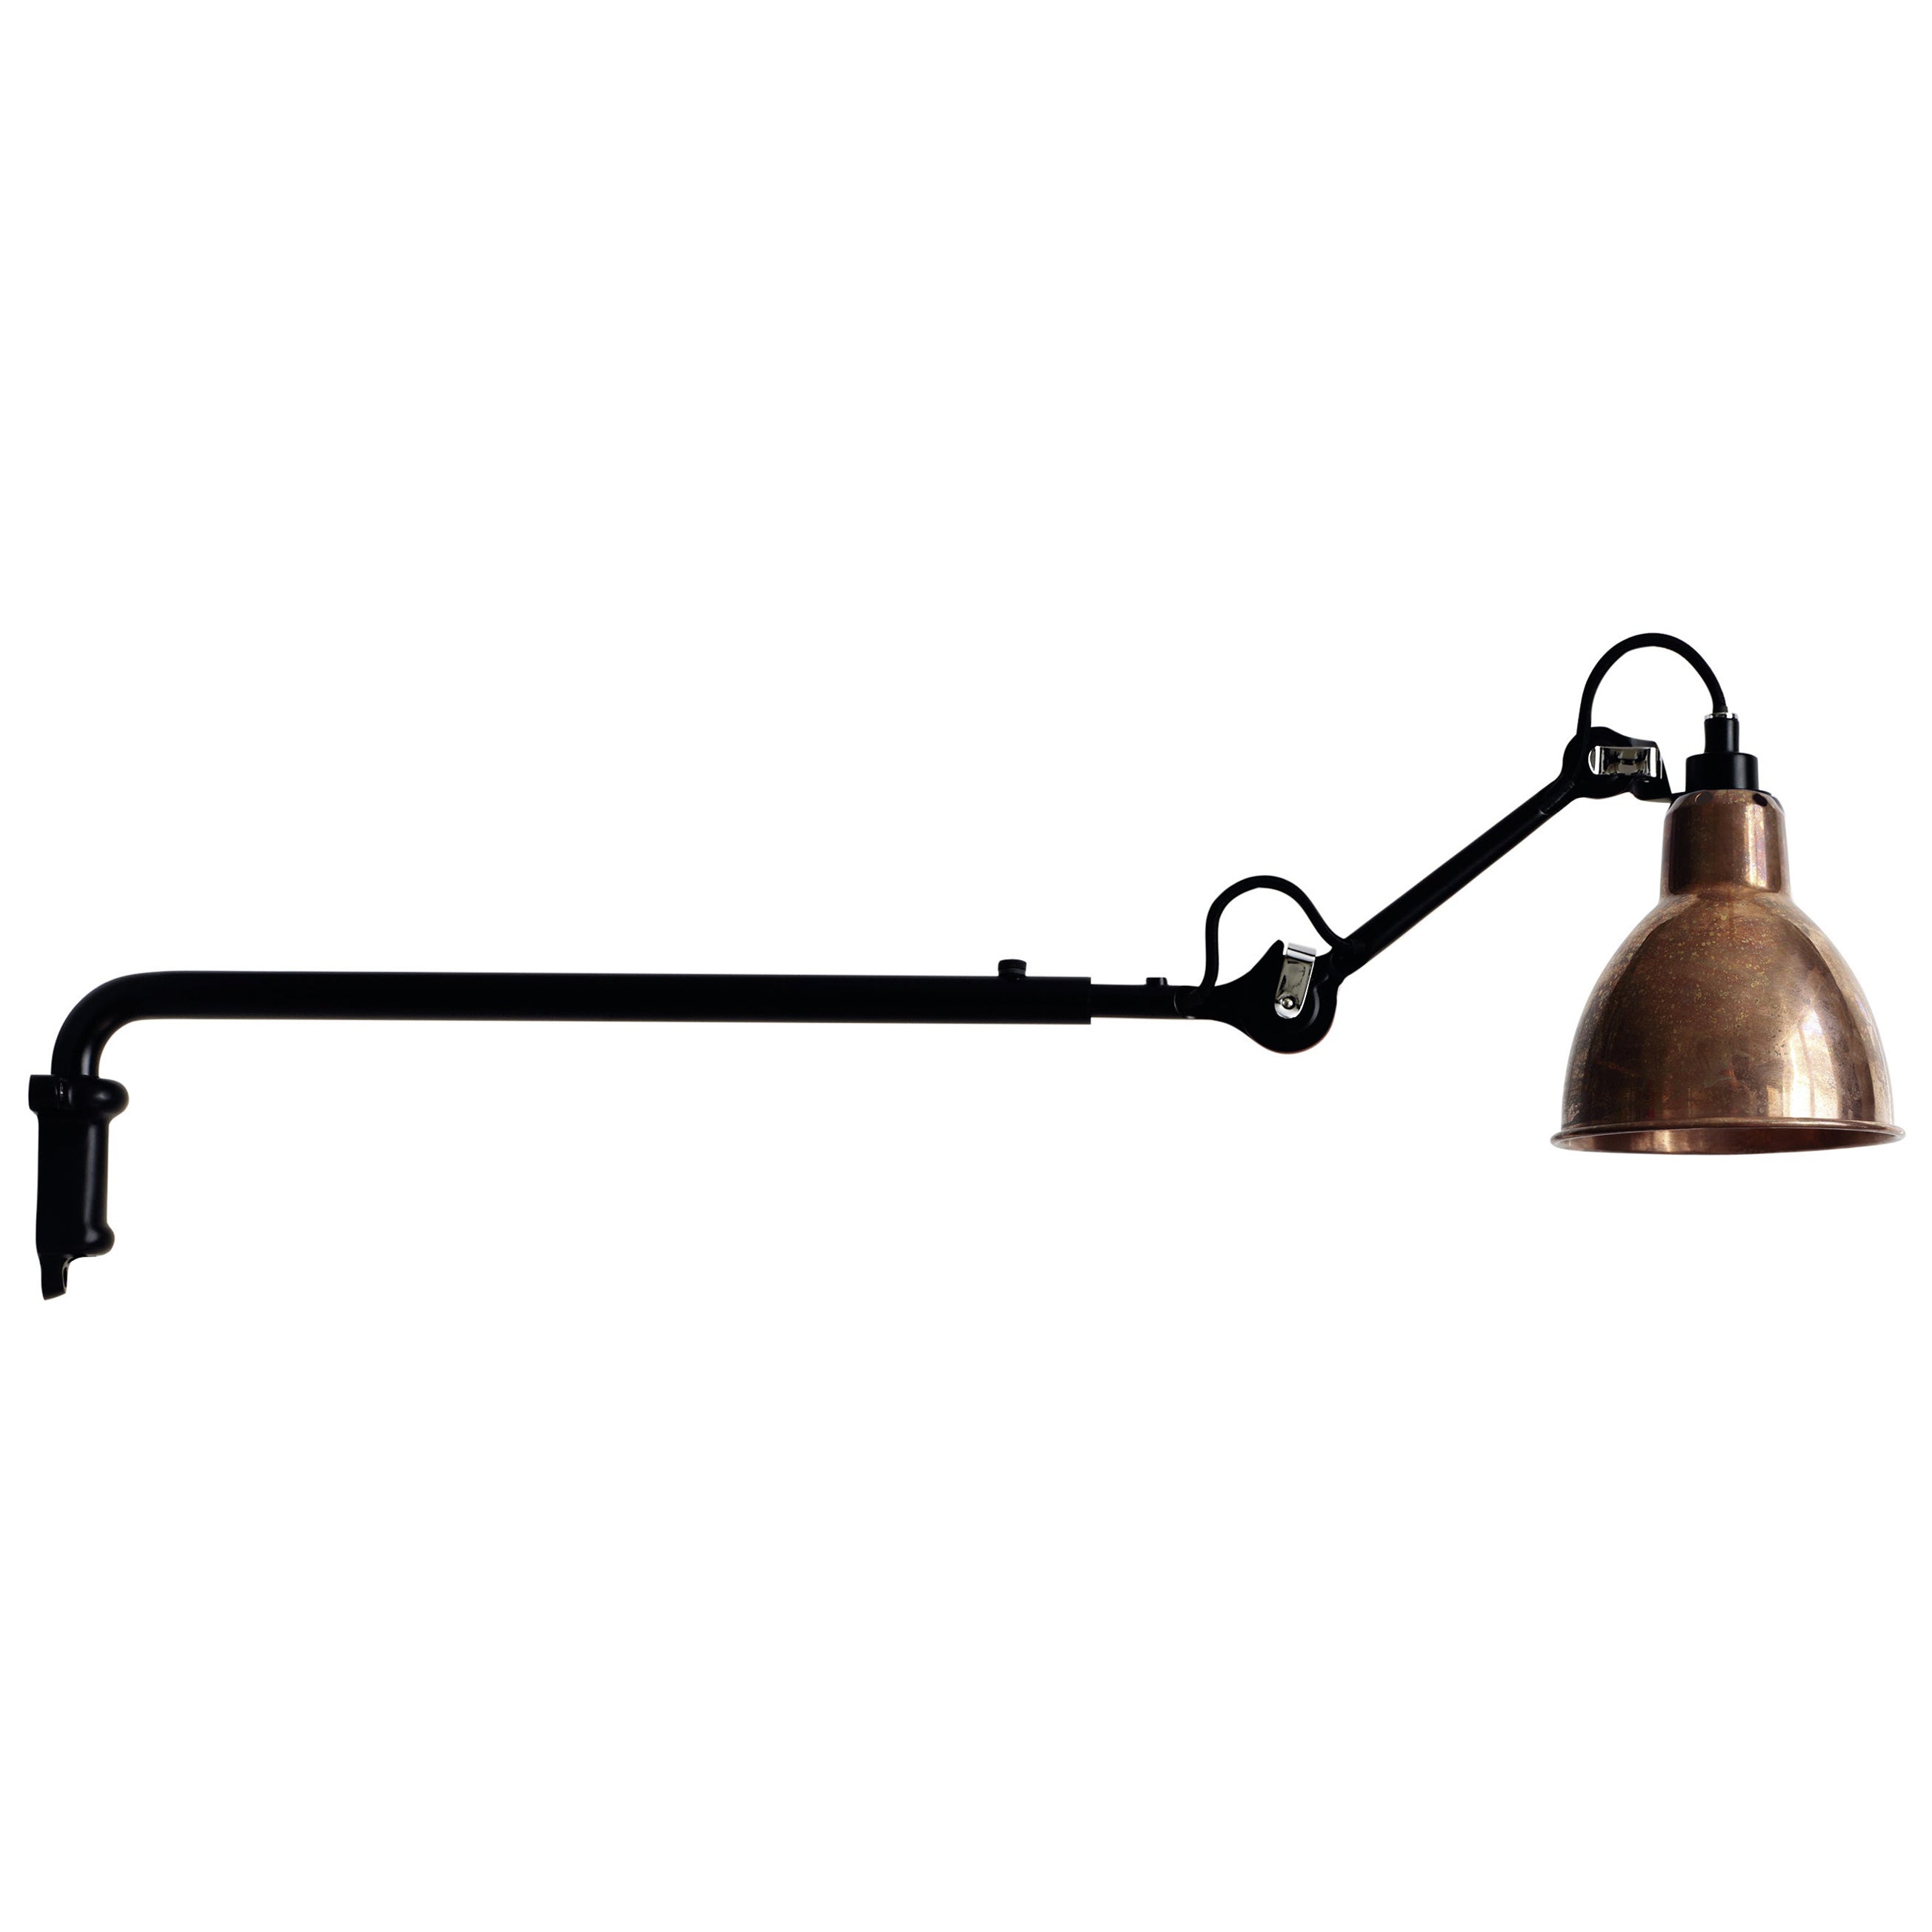 DCW Editions La Lampe Gras N°203 Wall Lamp in Black Steel Arm & Raw Copper Shade For Sale